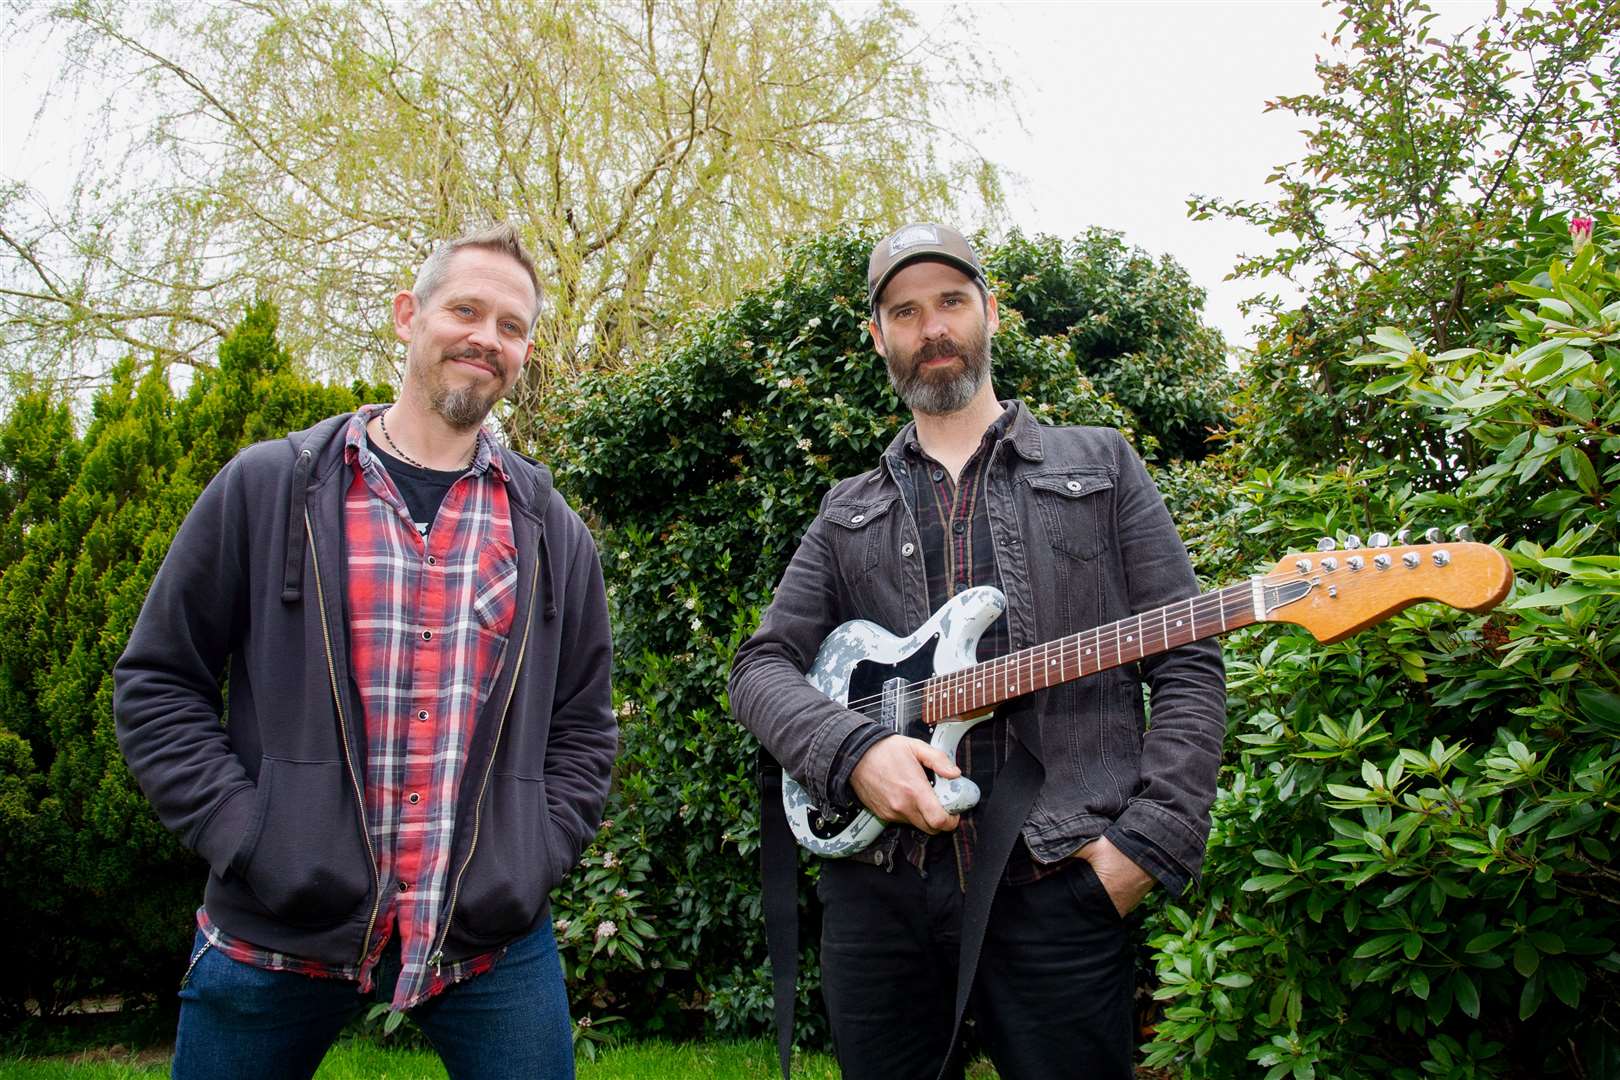 Steve Simms (left) and Dave Martin, of I Will Take You Hunting, are offering to play free, one-hour live gigs at people's homes when Covid-19 restrictions drop further. Picture: Daniel Forsyth.